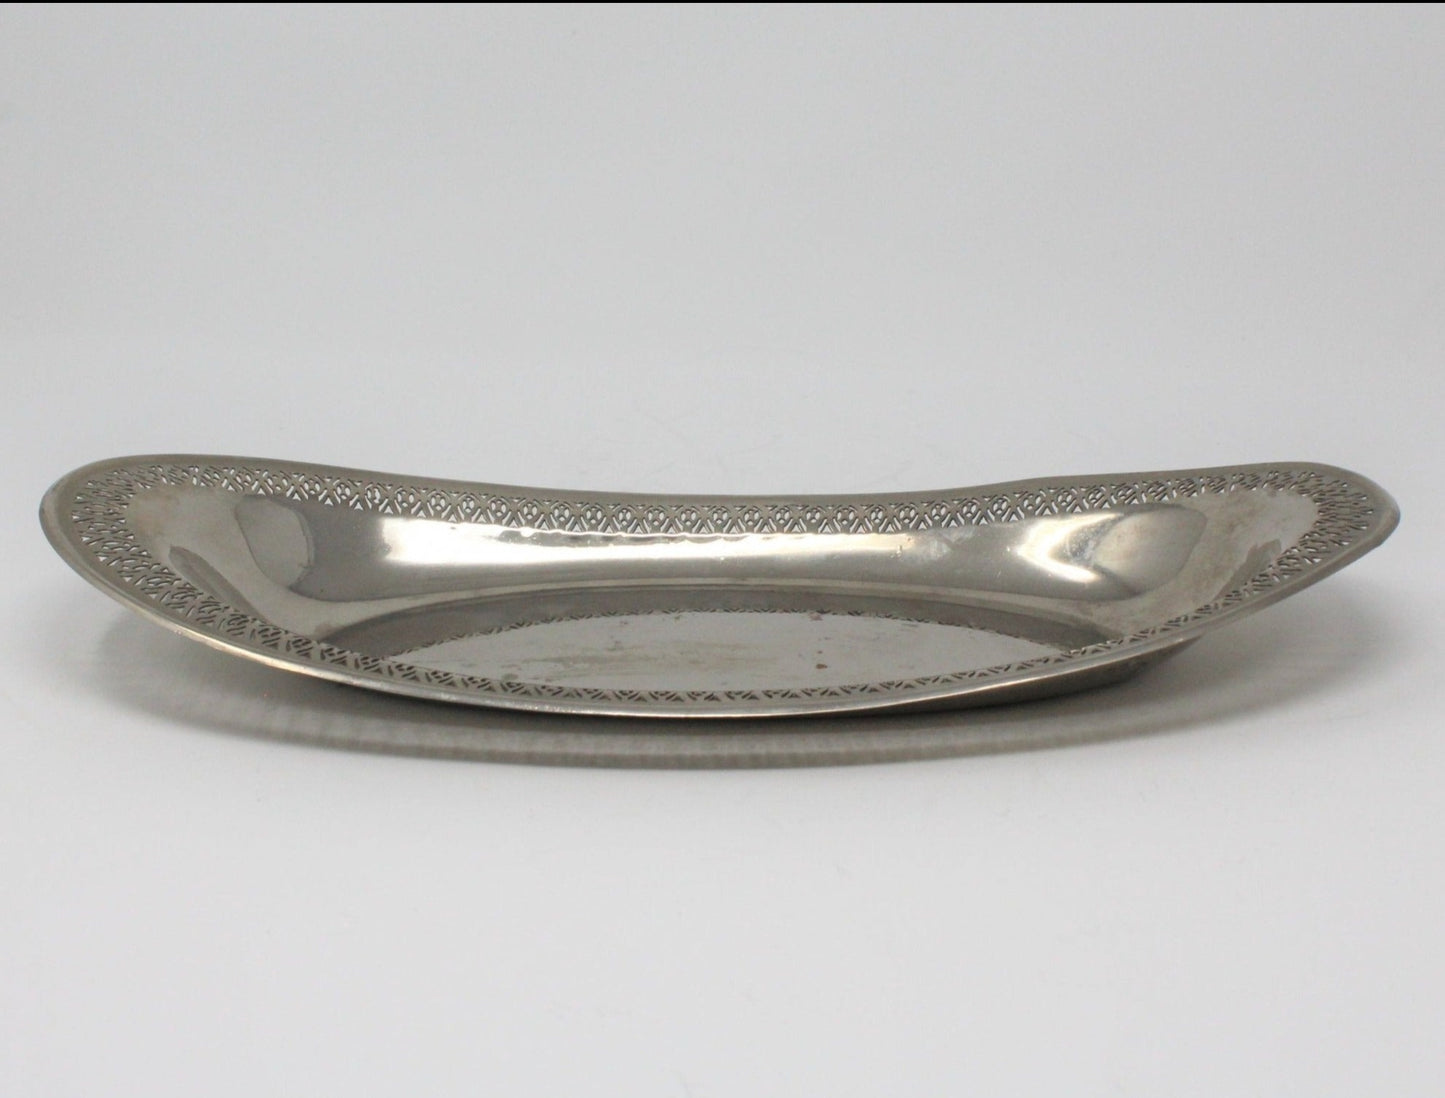 Tray, Homan, Bread Tray, Reticulated, Silverplate, Vintage